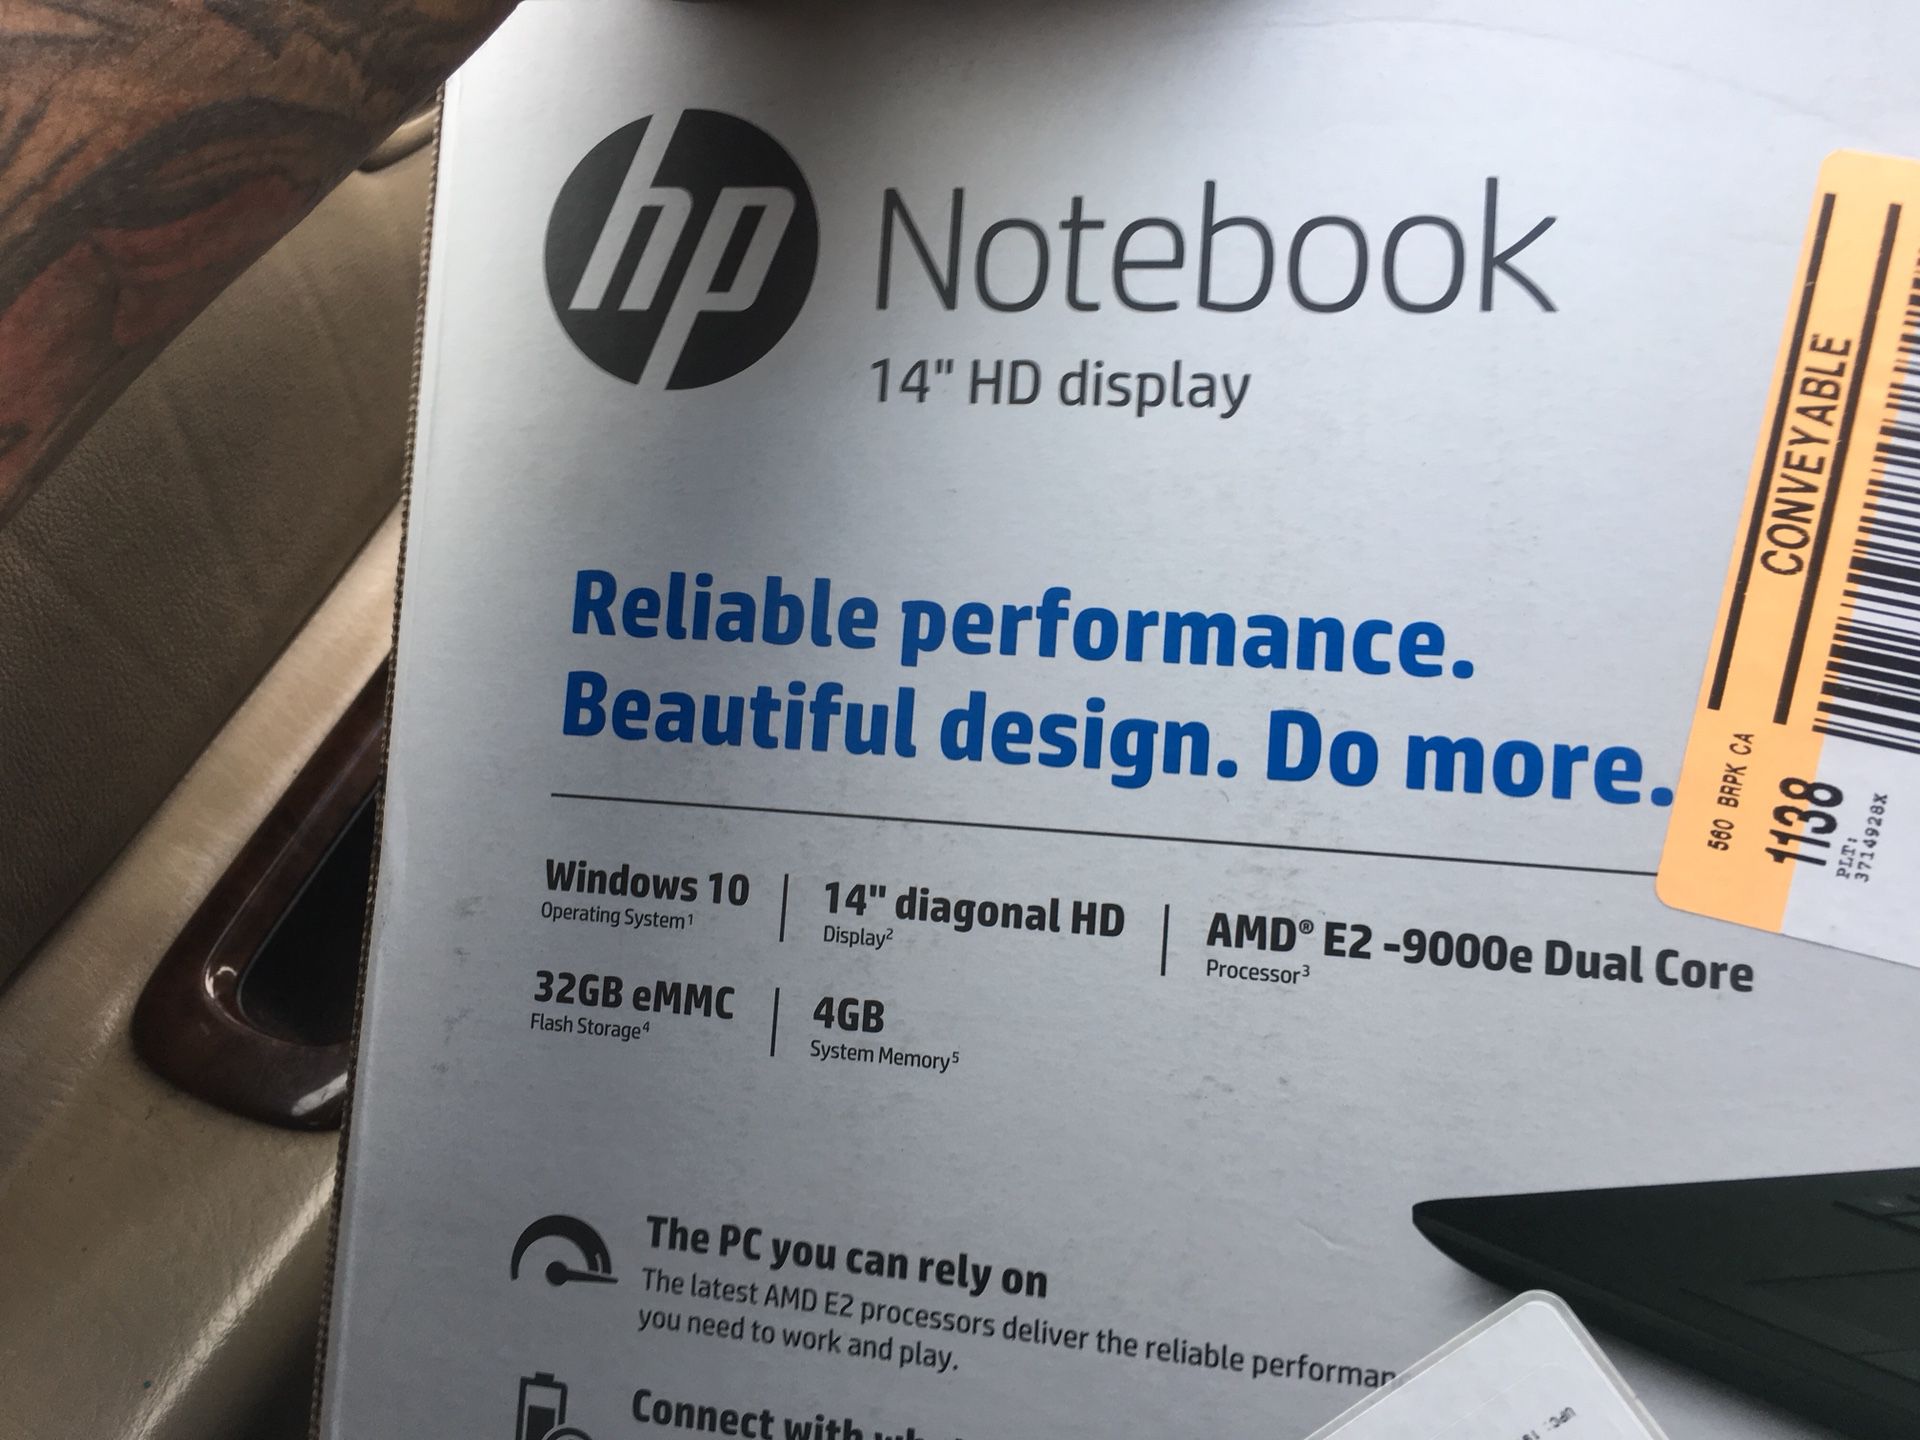 Note book laptop $170